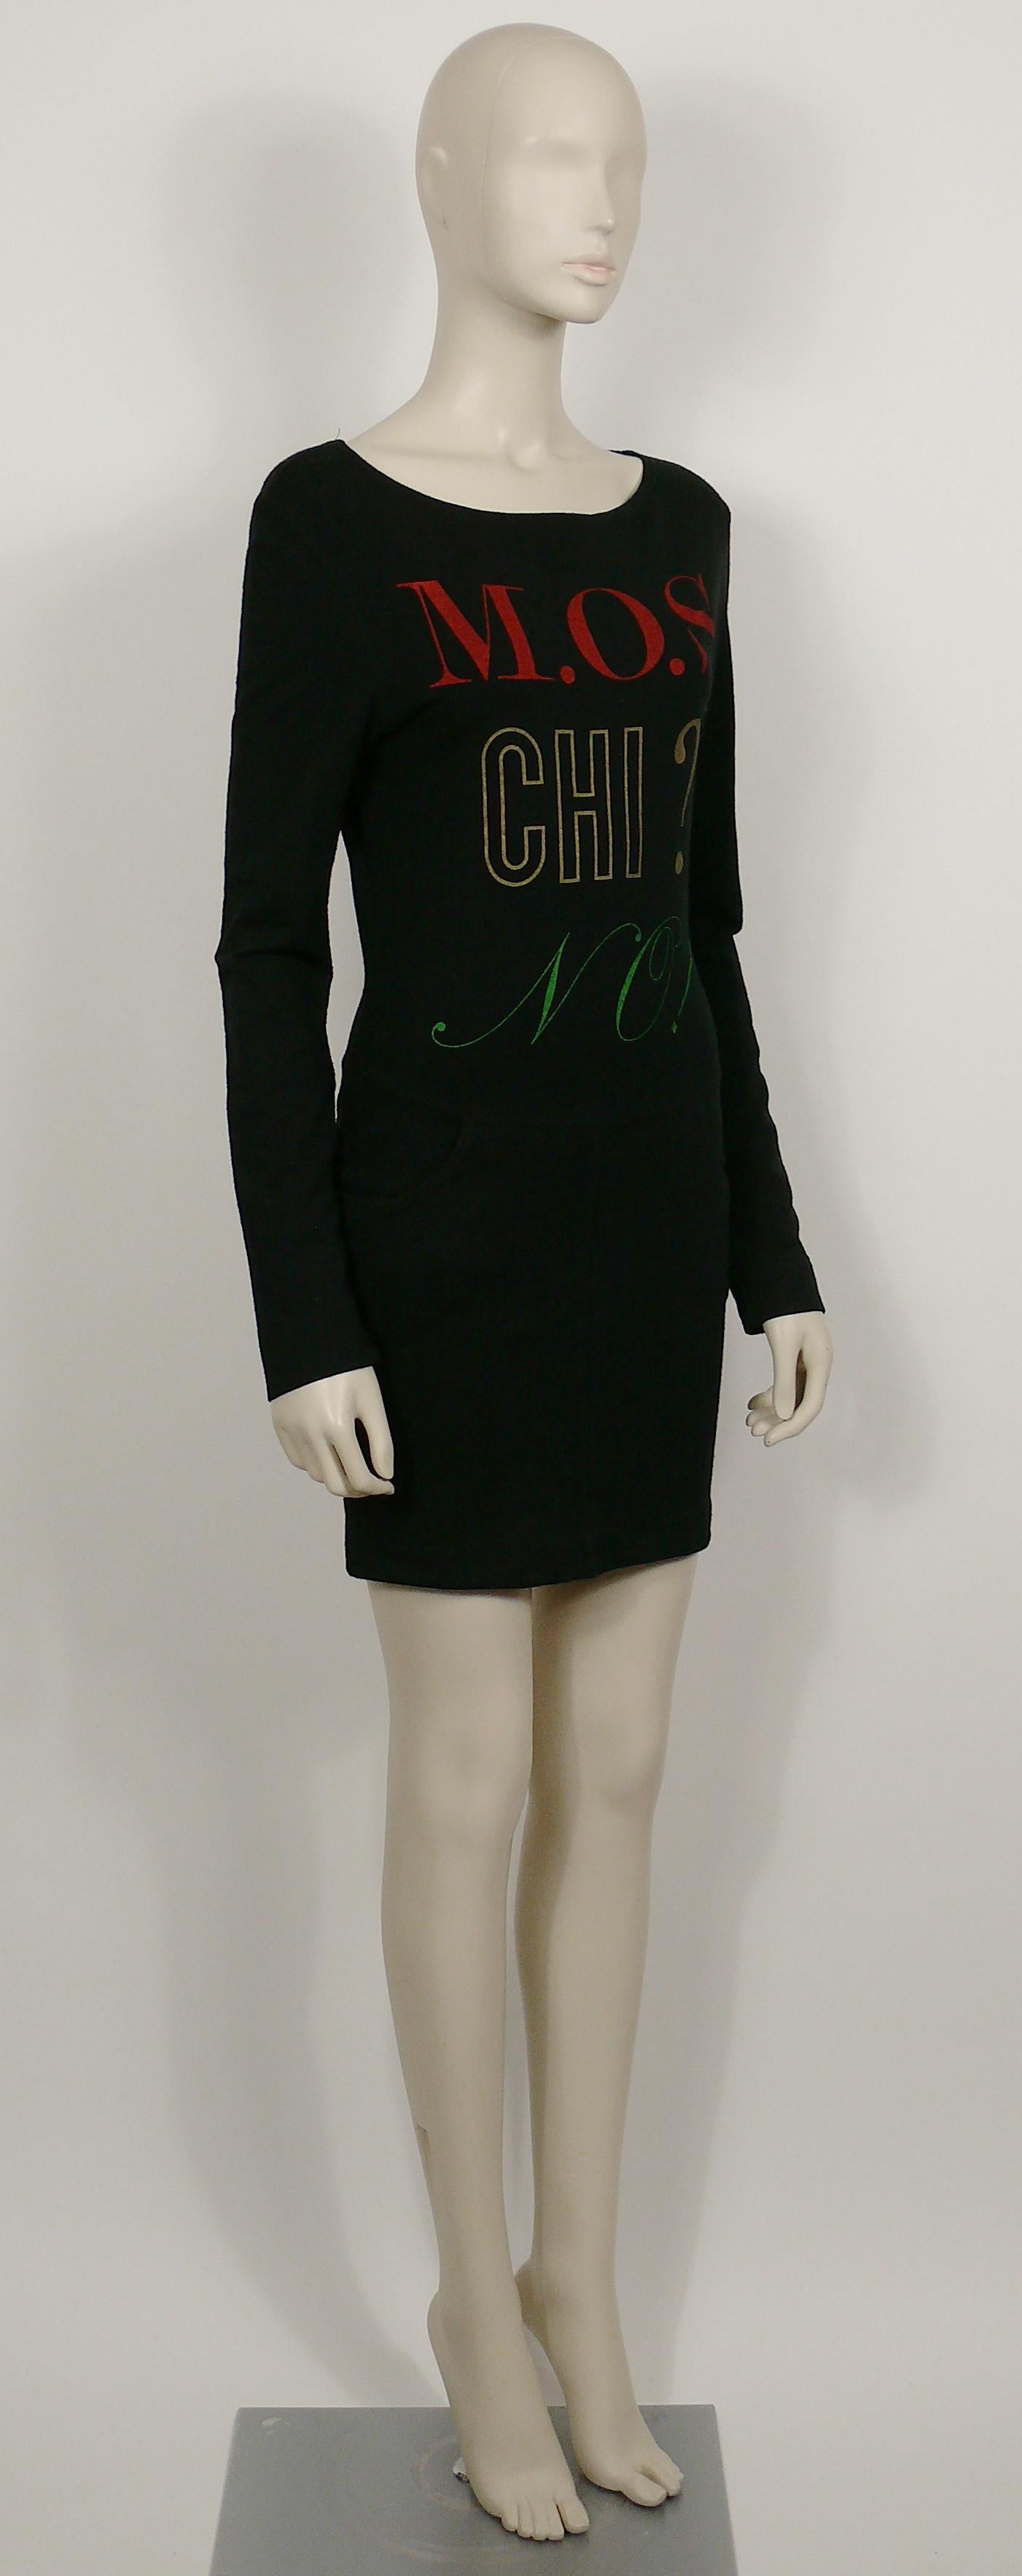 MOSCHINO vintage black jersey mini dress featuring a 